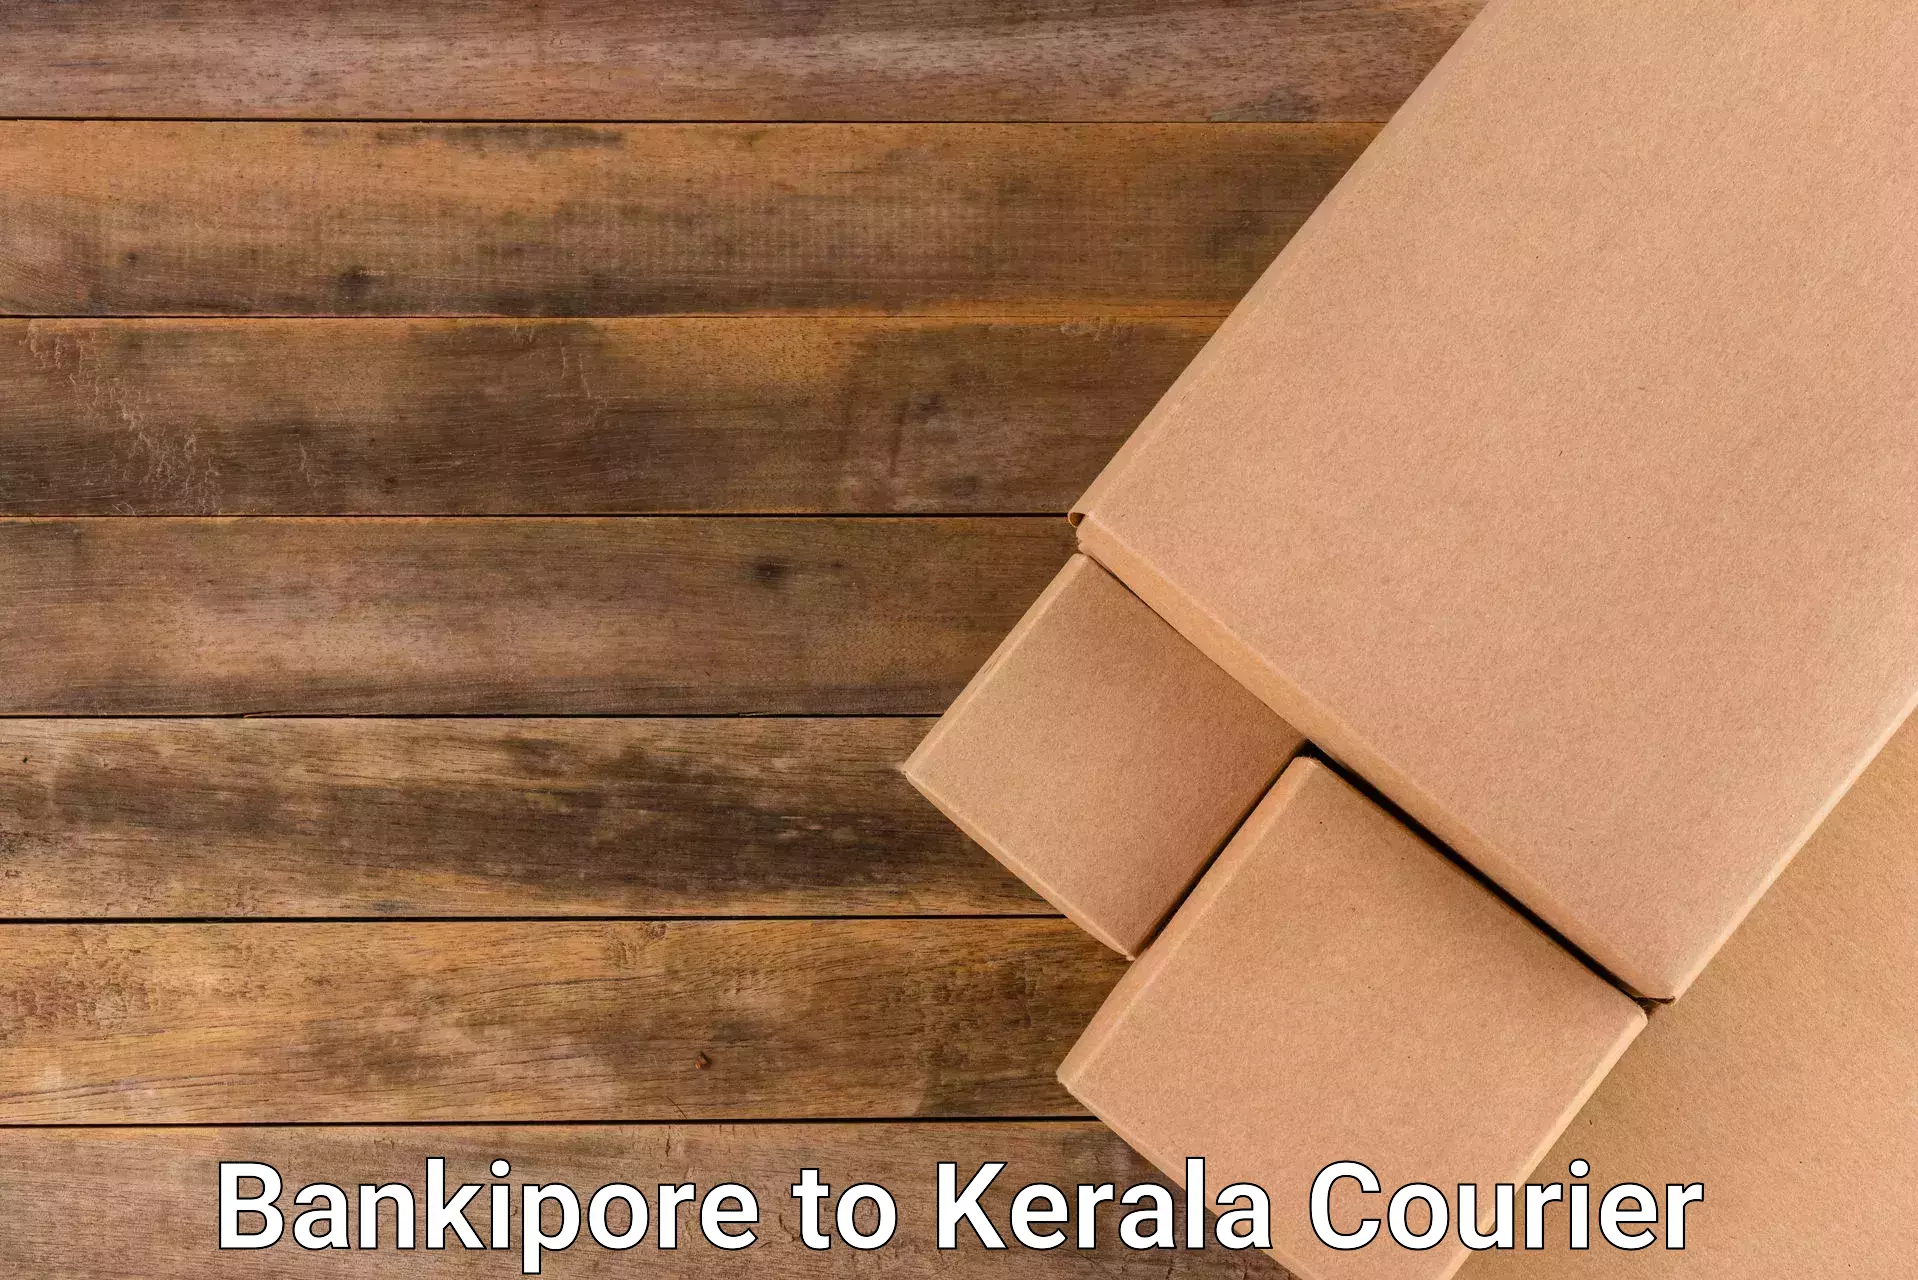 Large-scale shipping solutions Bankipore to Trivandrum